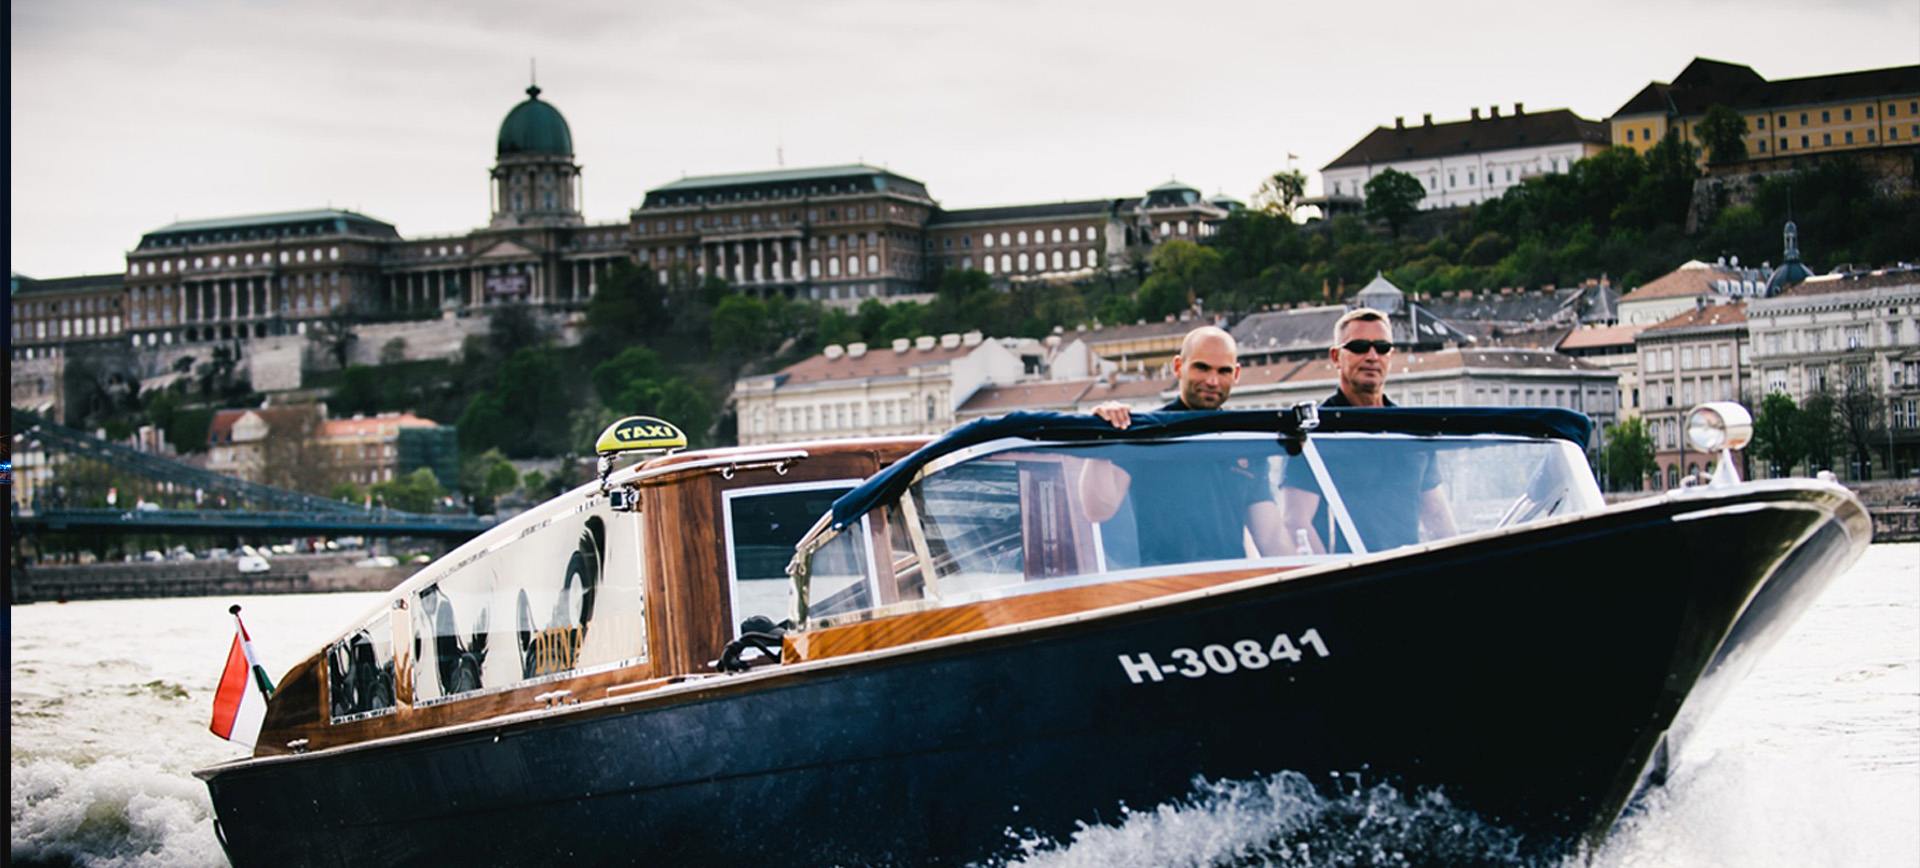 budapest wedding with boat ride - elope to europe